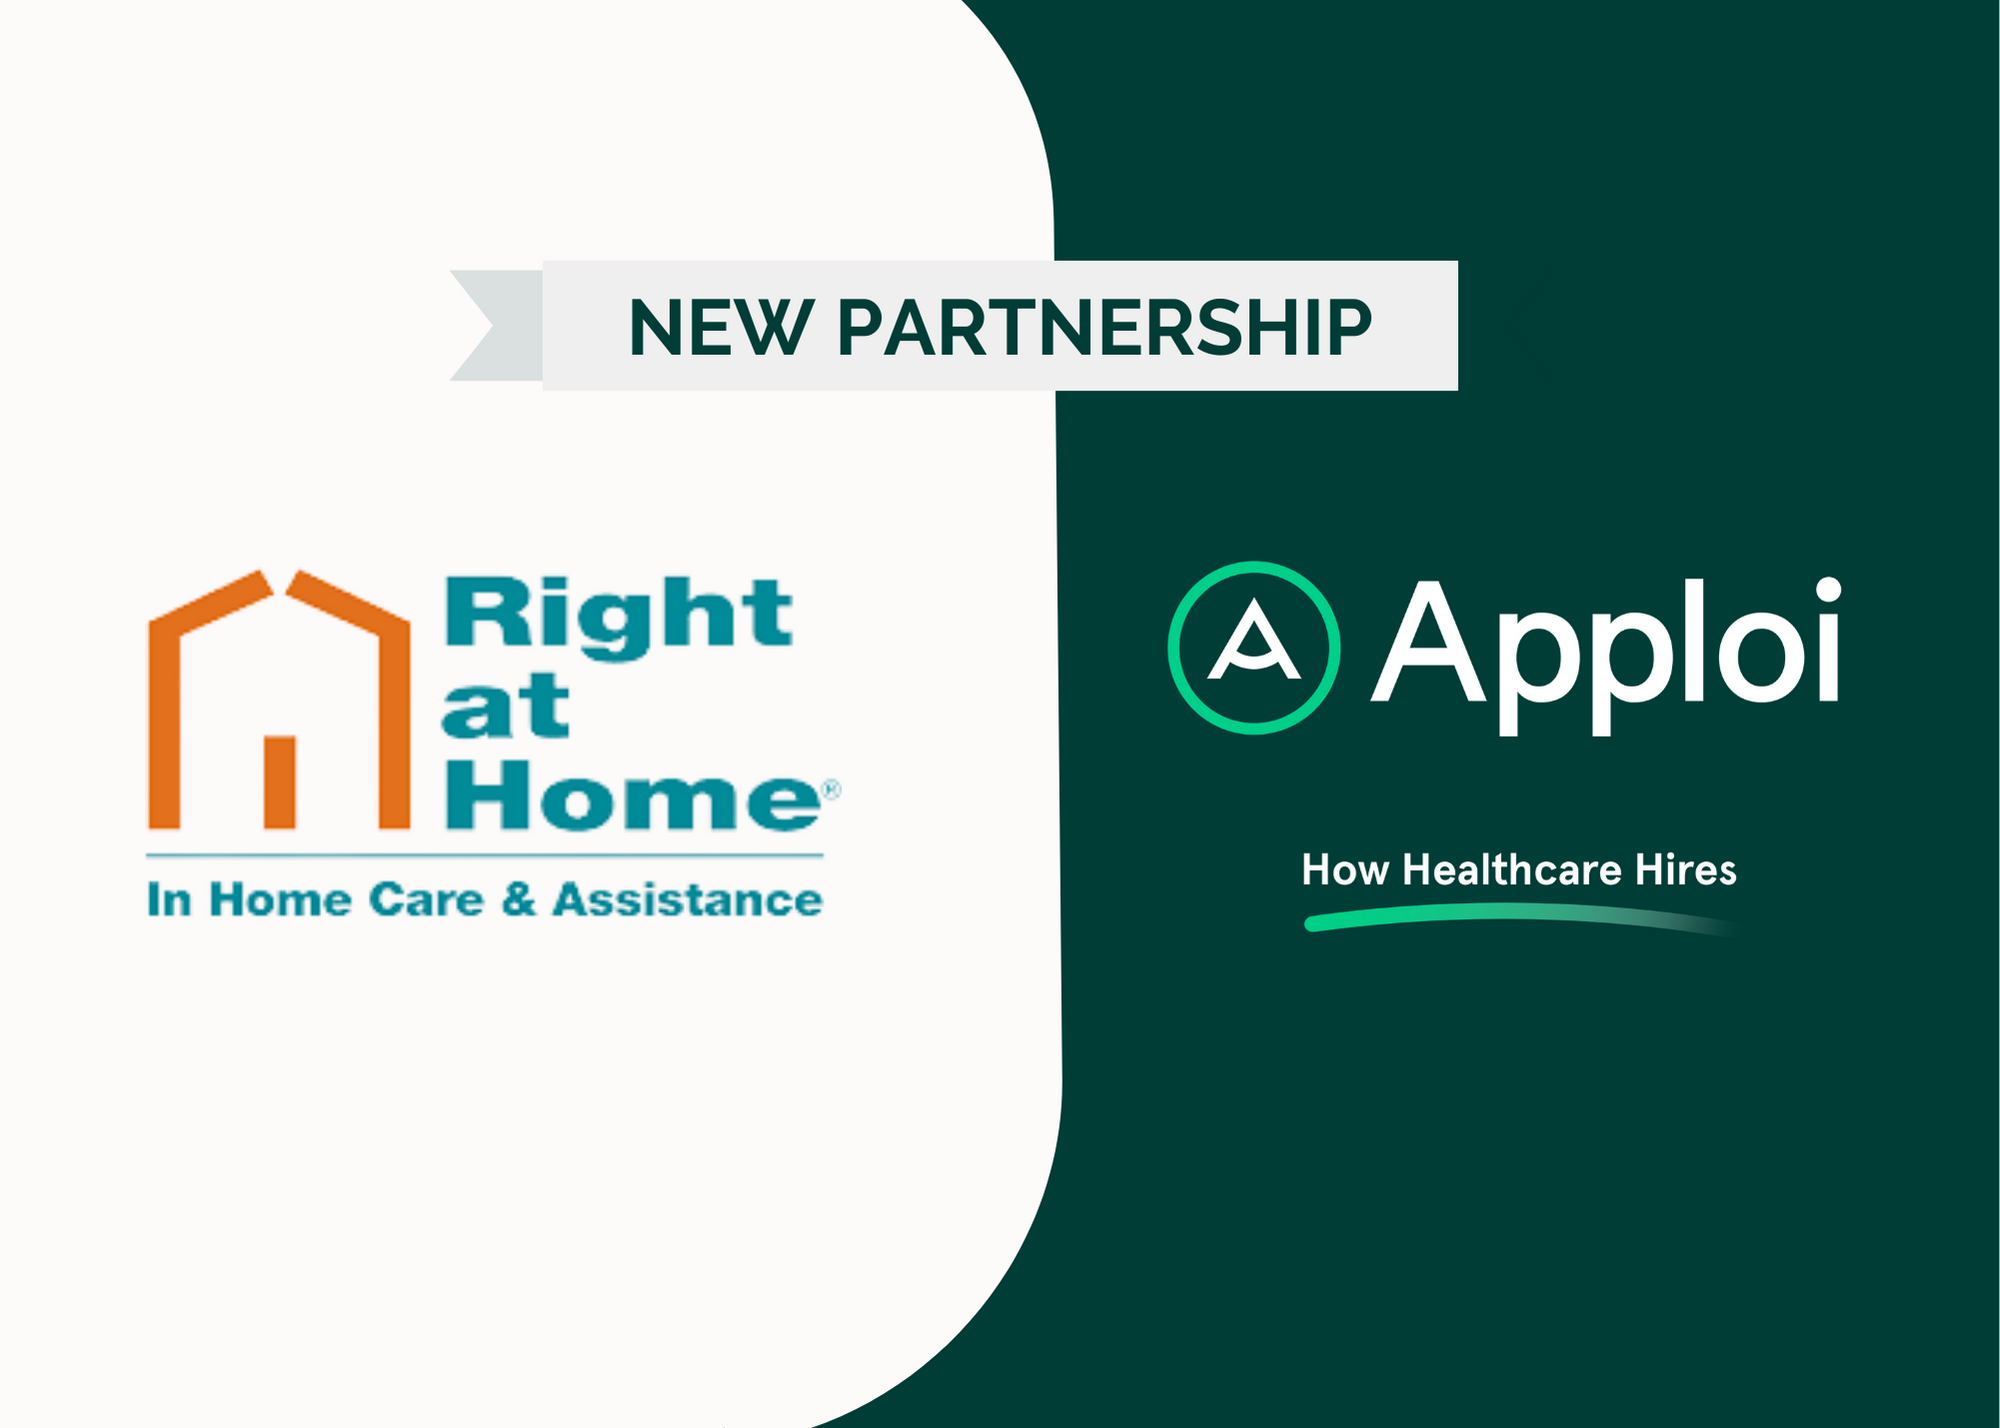 Apploi Announces Partnership With In-Home Care Leader Right at Home